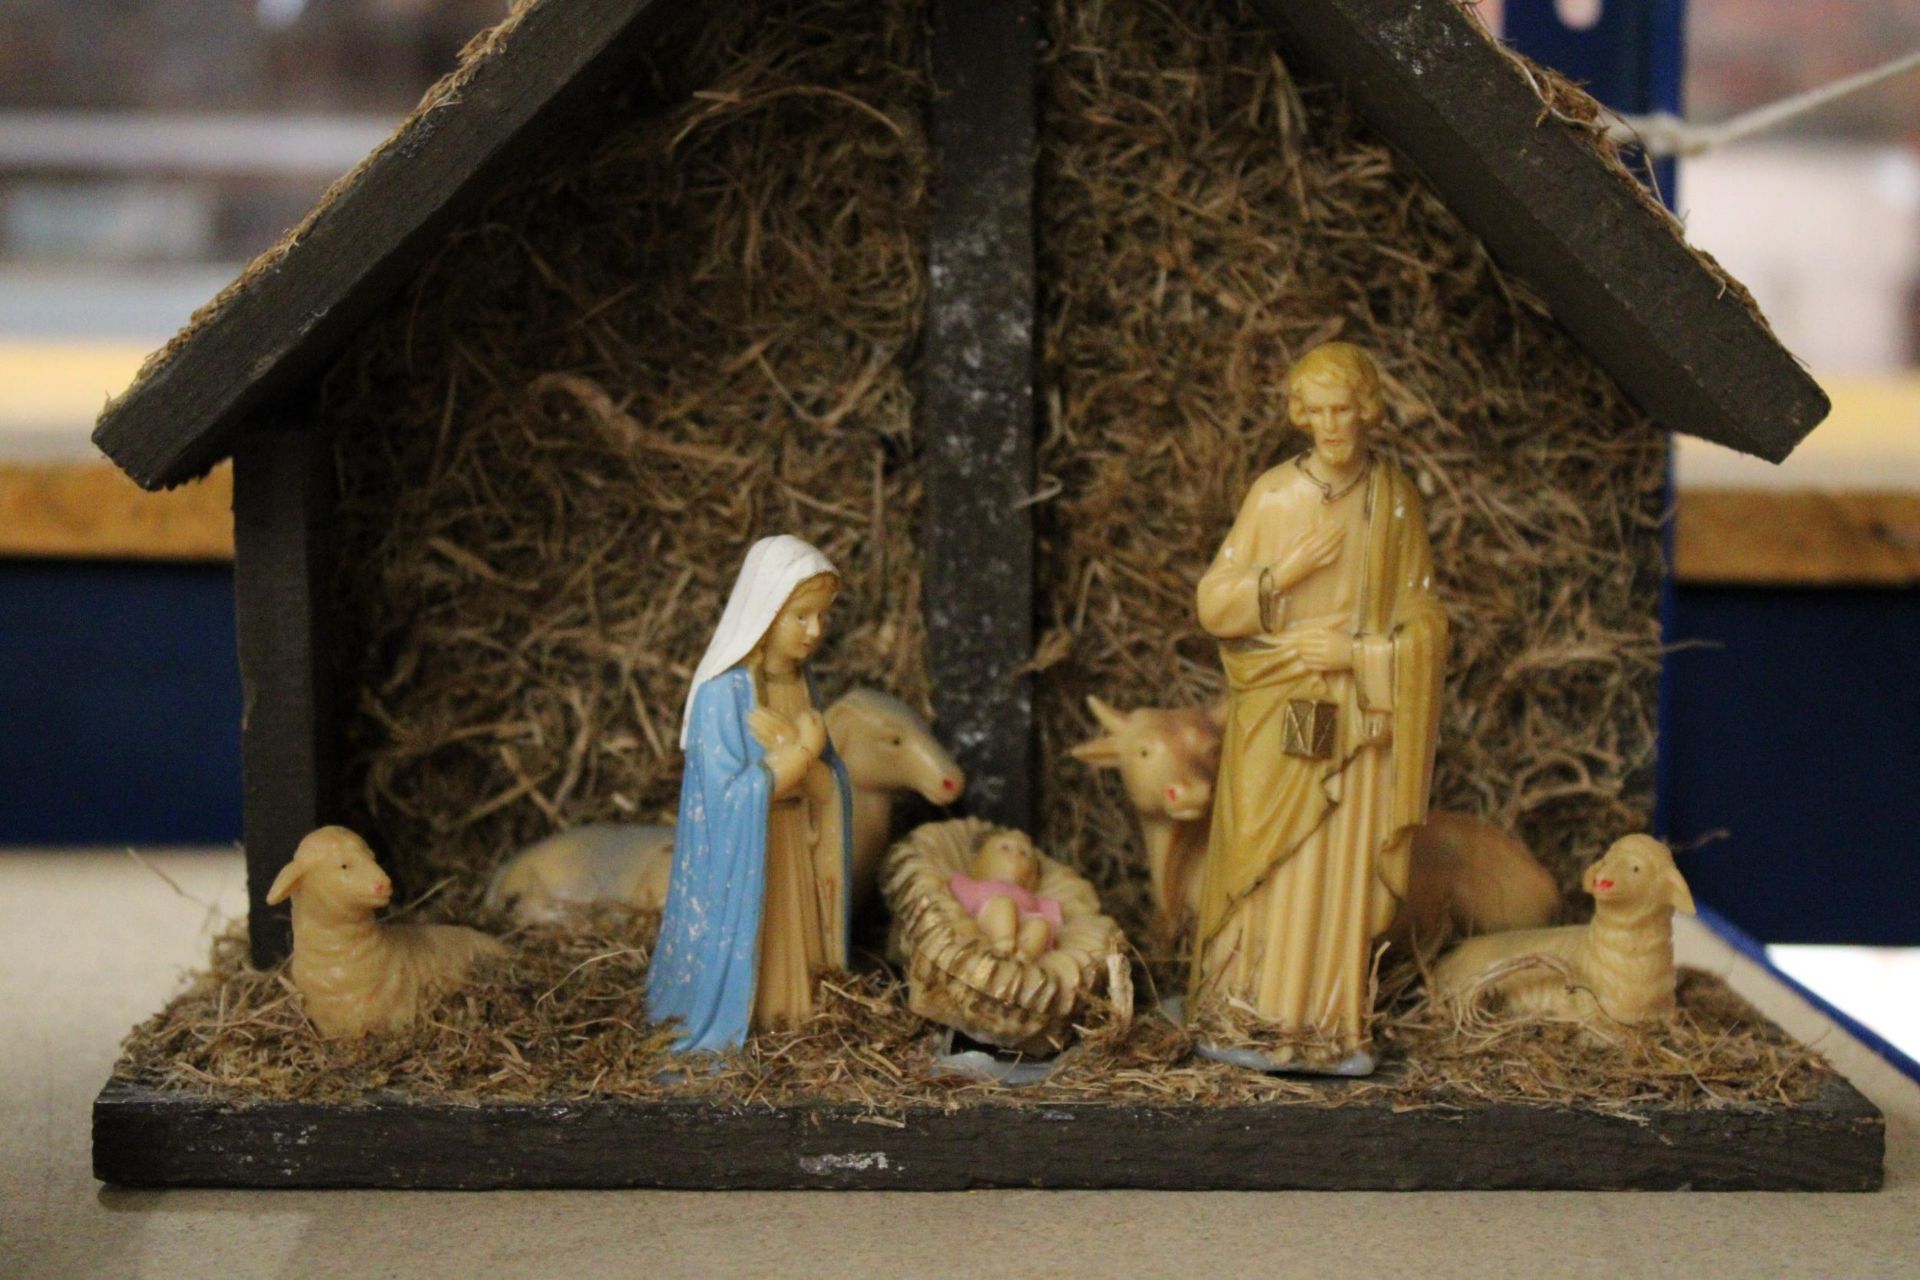 A VINTAGE CHRISTMAS WOODEN MANGER WITH FIGURES - Image 2 of 5